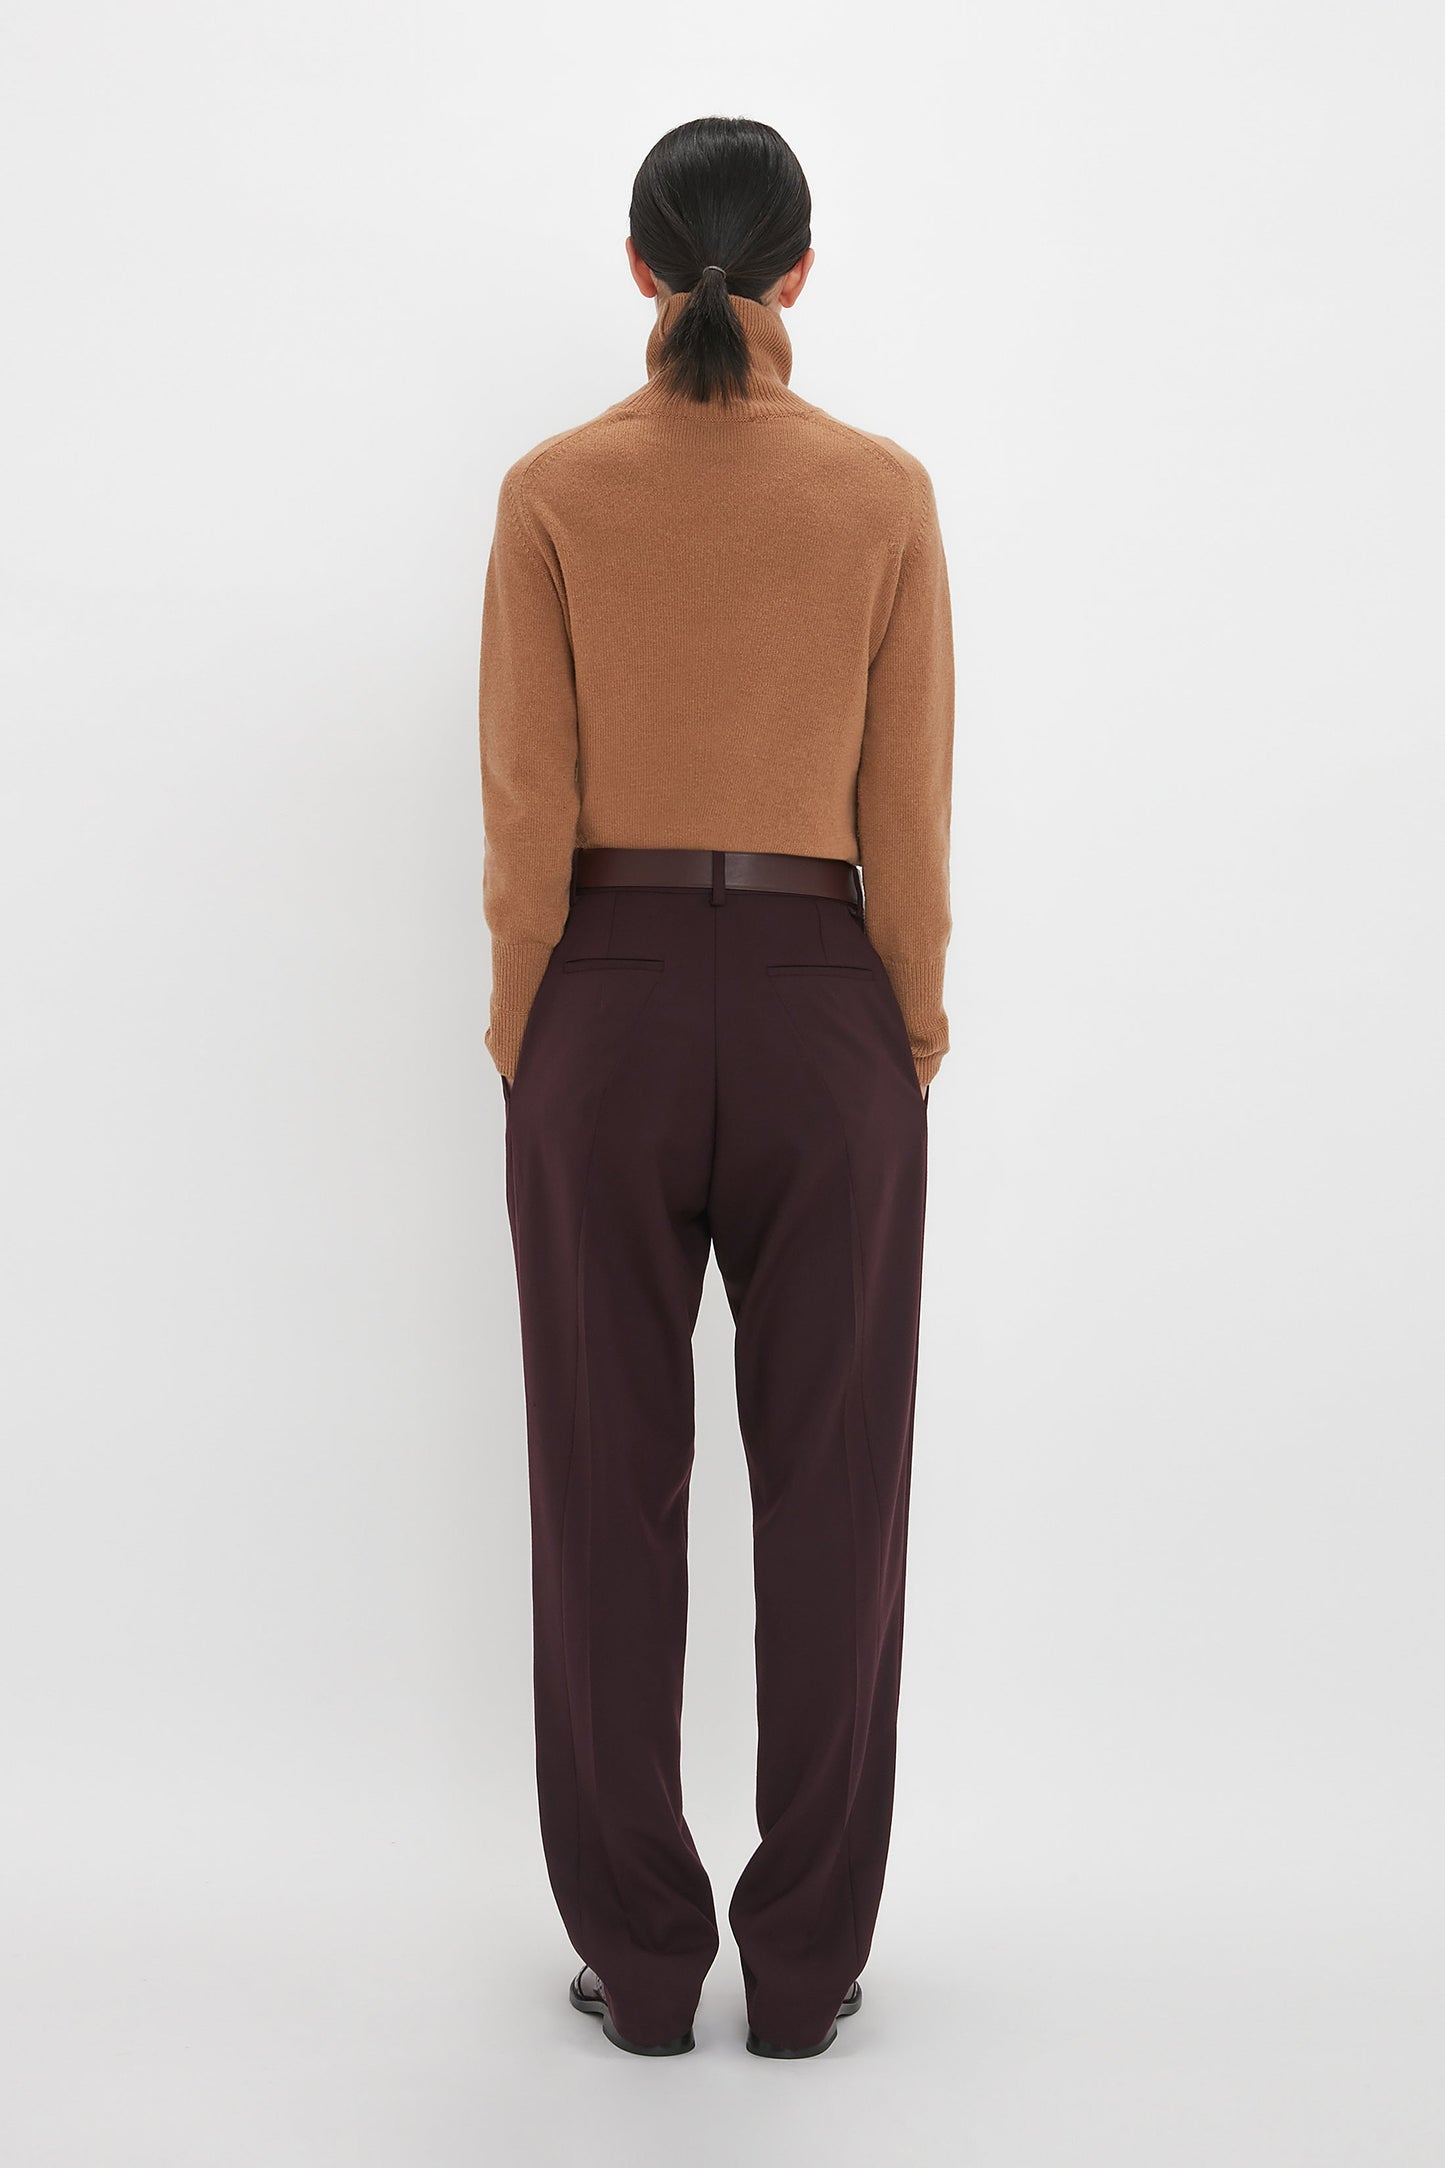 A person stands facing away from the camera, wearing a tan long-sleeve top and loose-fitting **Asymmetric Chino Trouser In Deep Mahogany** by **Victoria Beckham** against a plain white background.